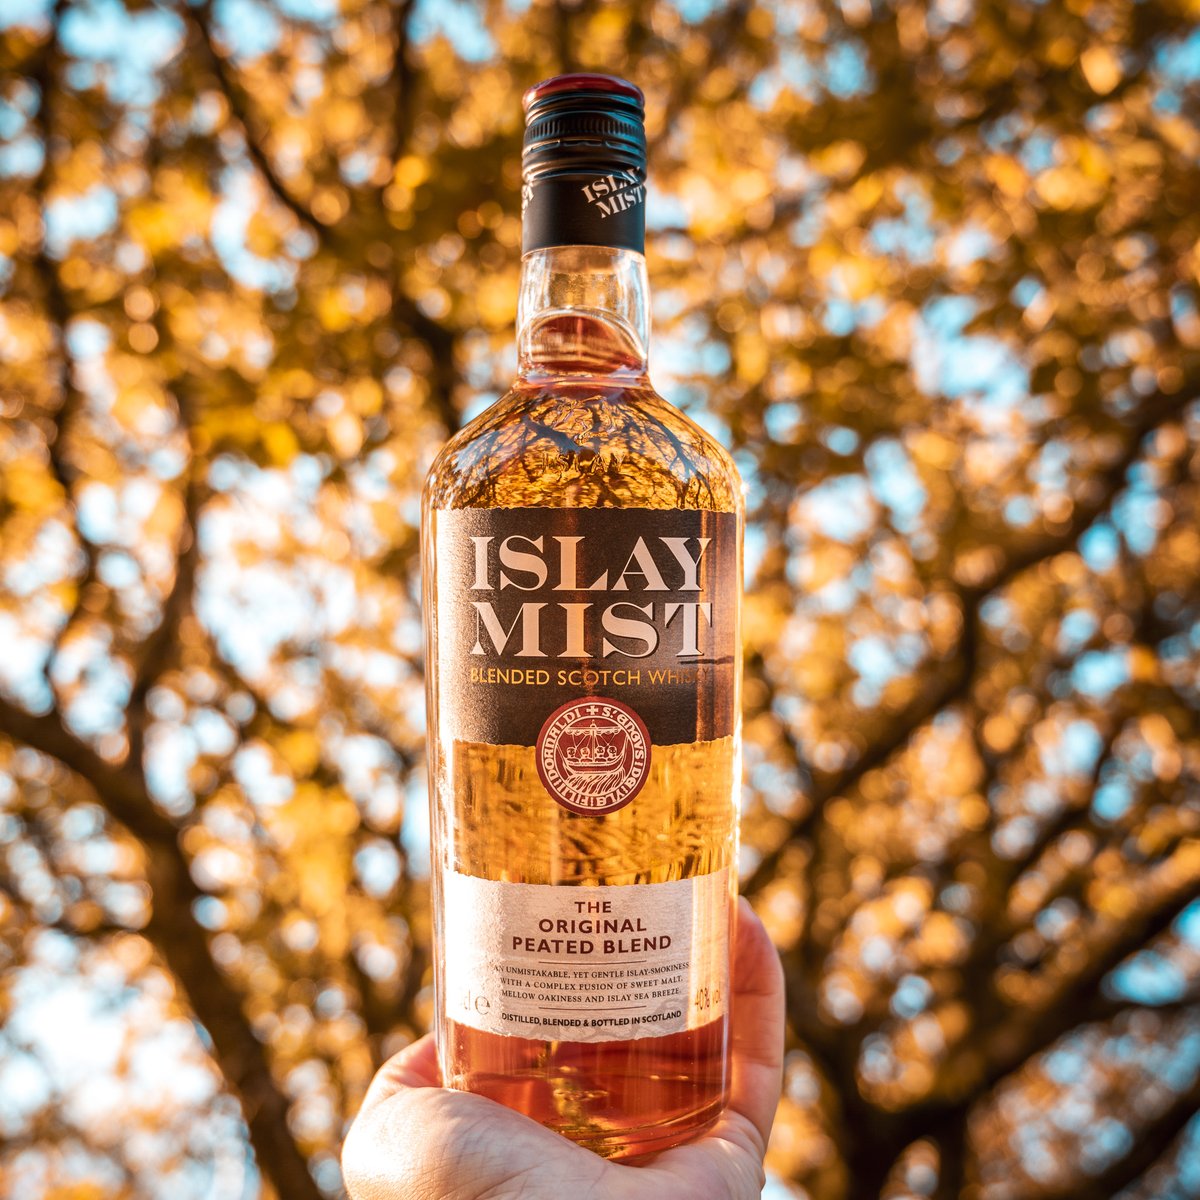 Raising a glass to warmer evenings with a dram of our favourite peated blend. 🥃

Show Character & Drink Responsibly.

#islaywhisky #whiskylover